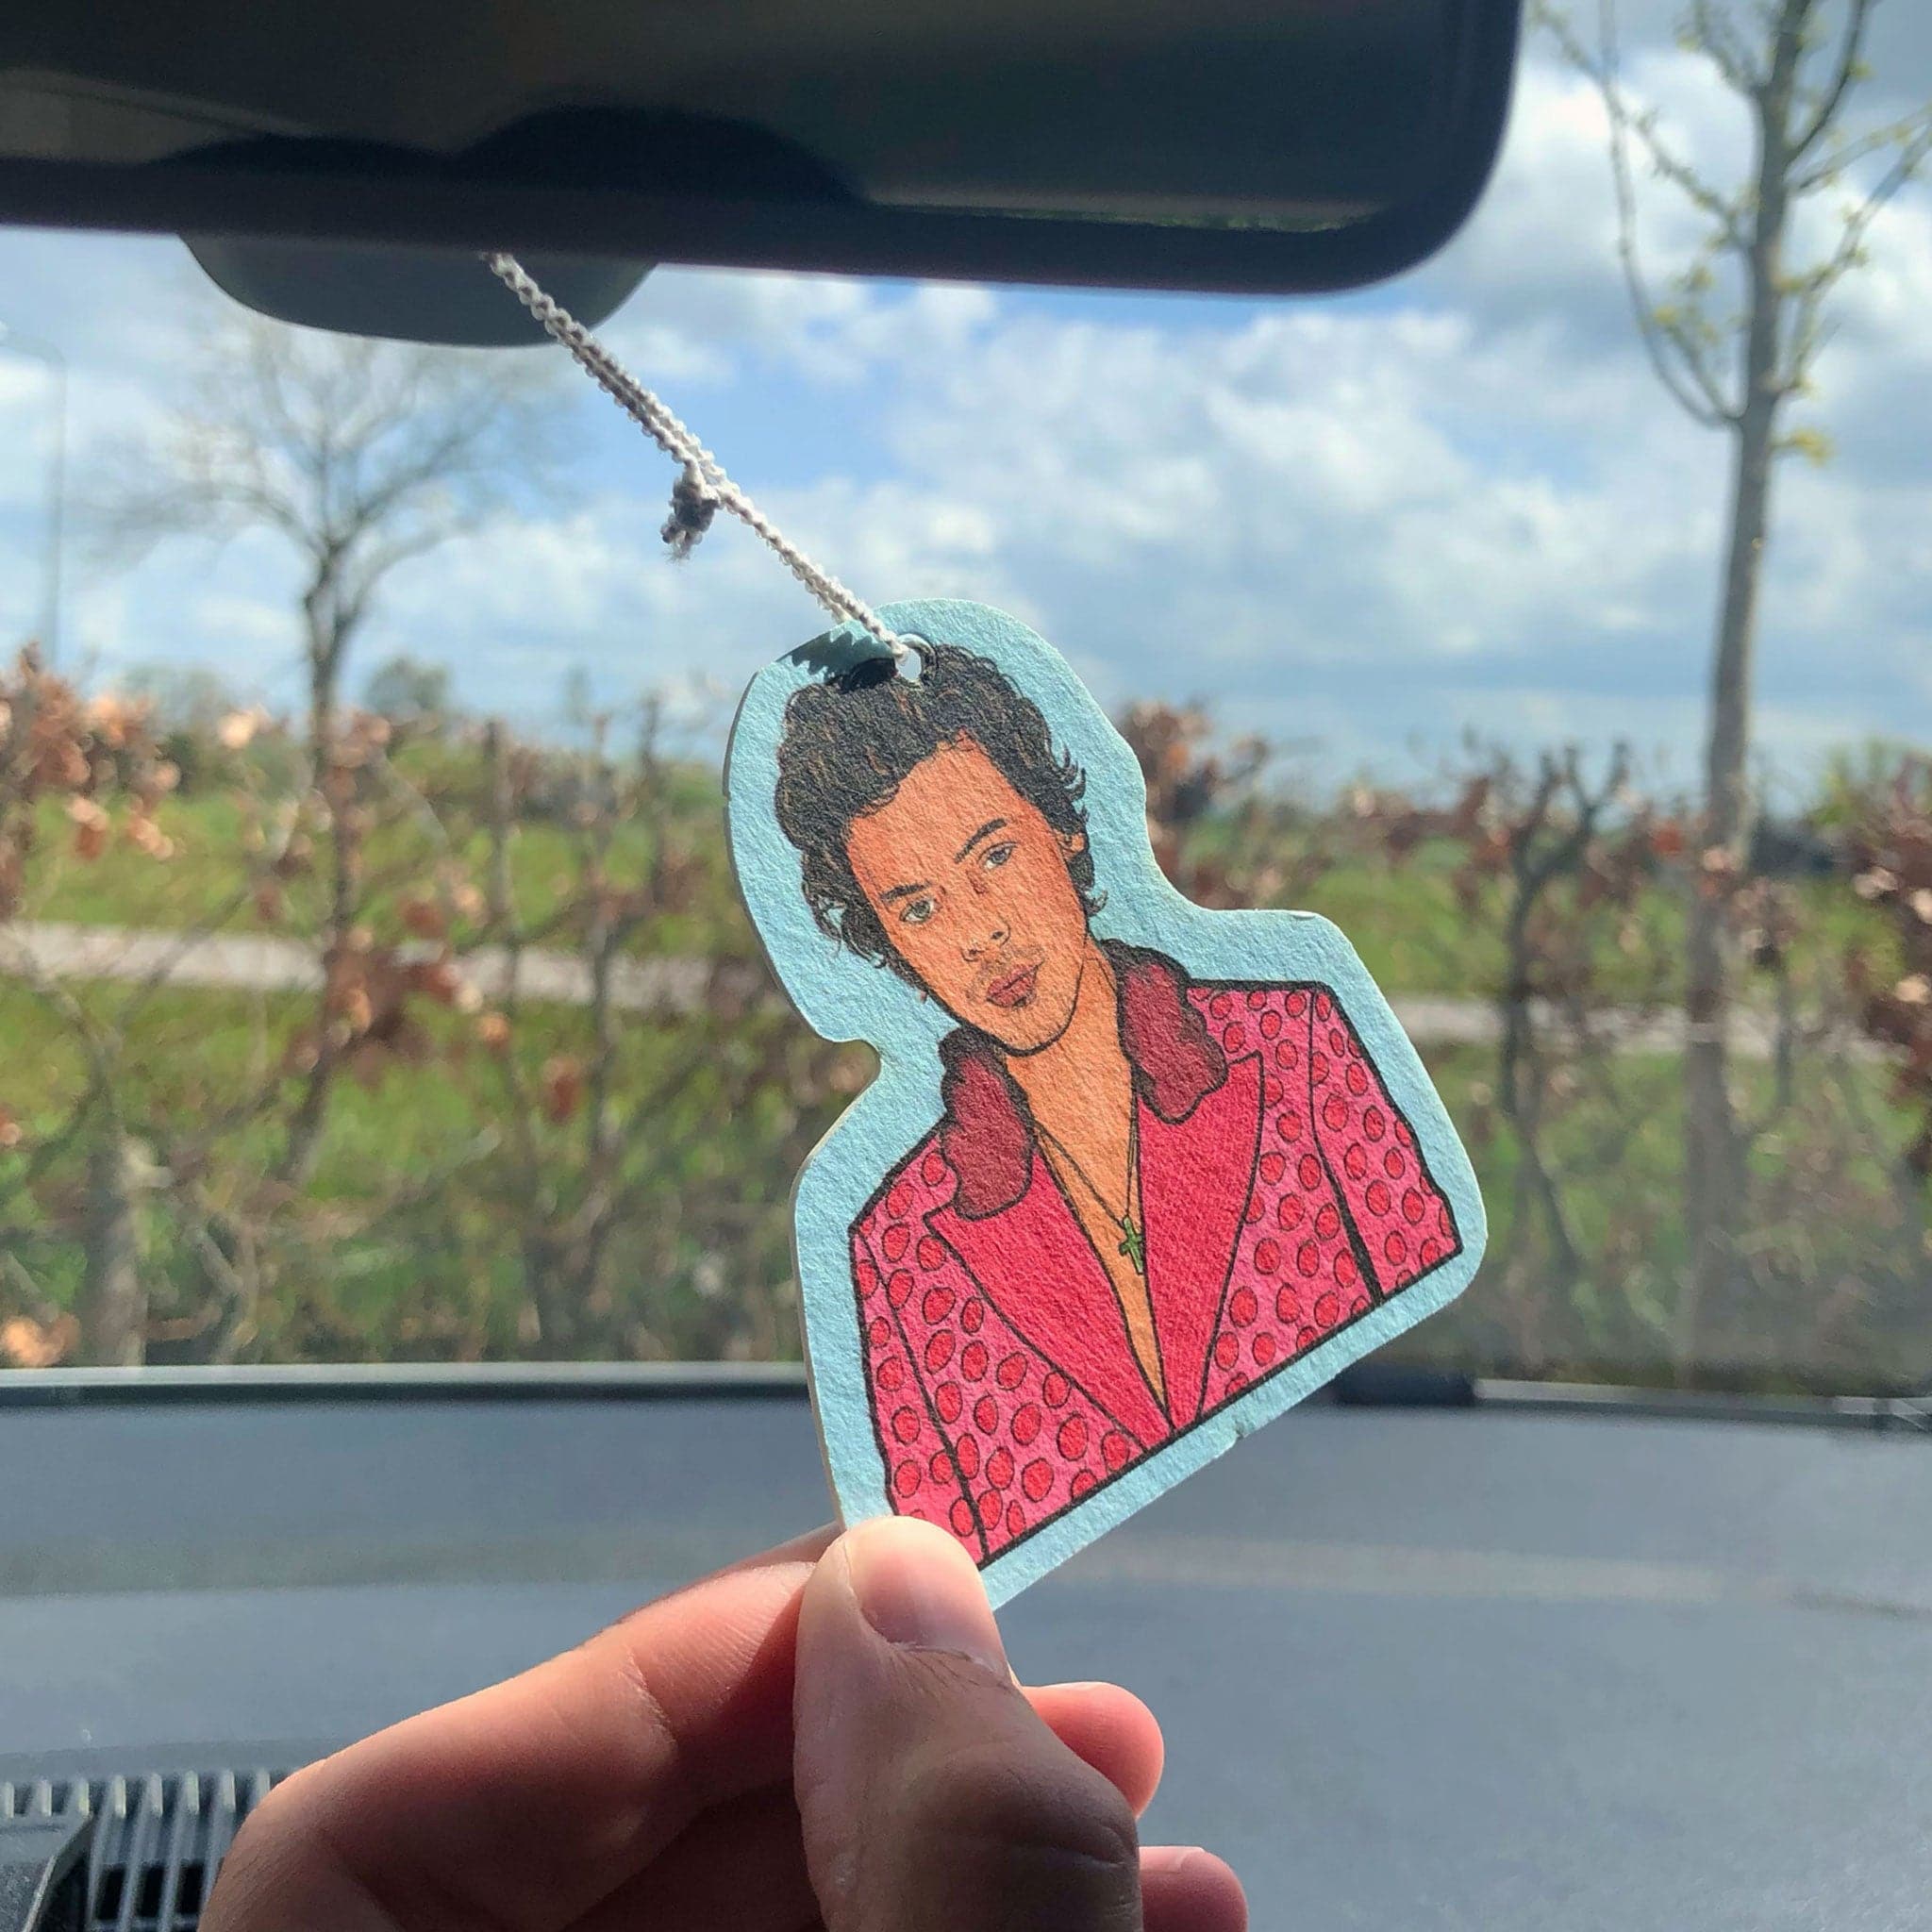 Light aqua air freshener with display the top half of Harry Styles wearing an iconic pink polo dot suit and cross necklace. Air freshener hangs on a white elastic loop from car mirror. A hand holds the air freshener in the light of the car window. 